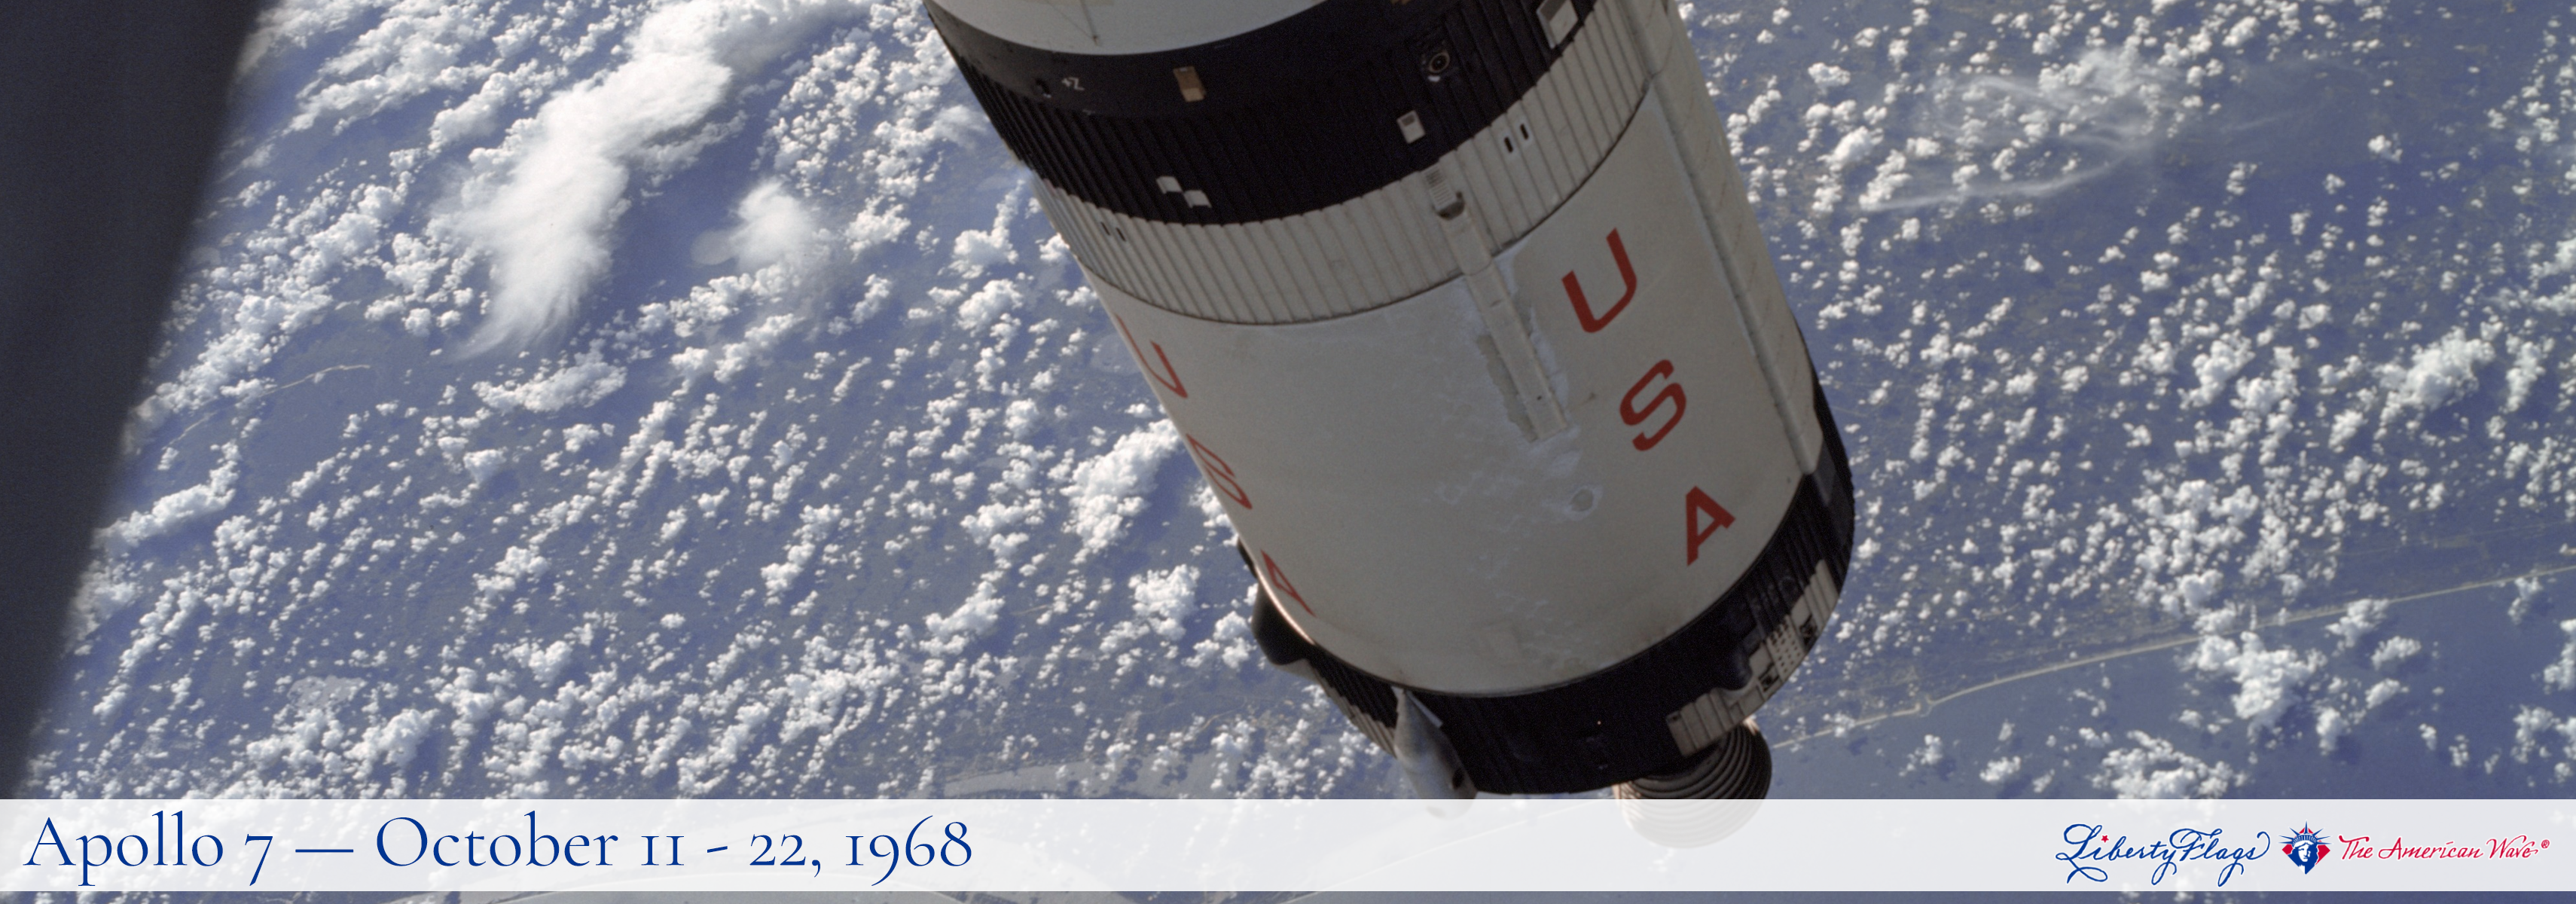 Apollo 7, October 11 - 22, 1968, with LIBERTY FLAGS, The American Wave®